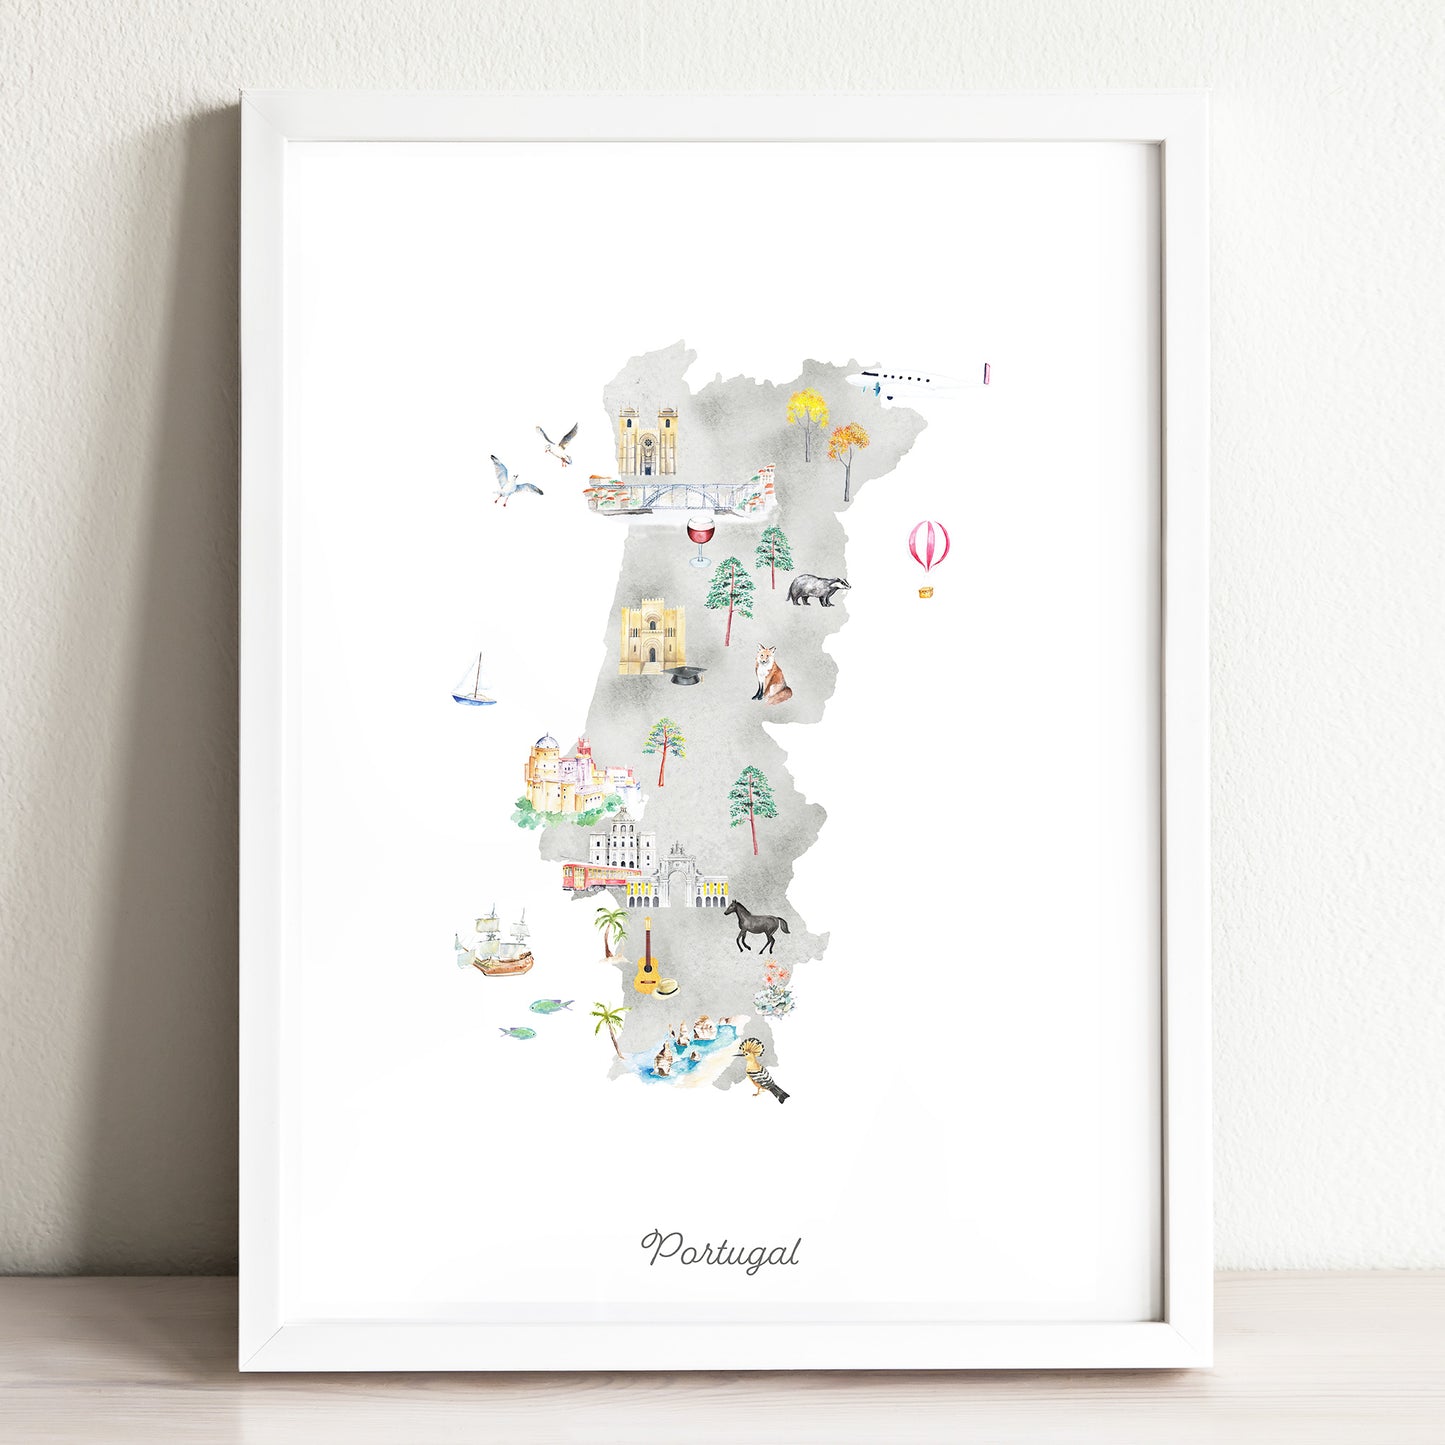 Illustrated map of Portugal with icons, cities, animals, landmarks